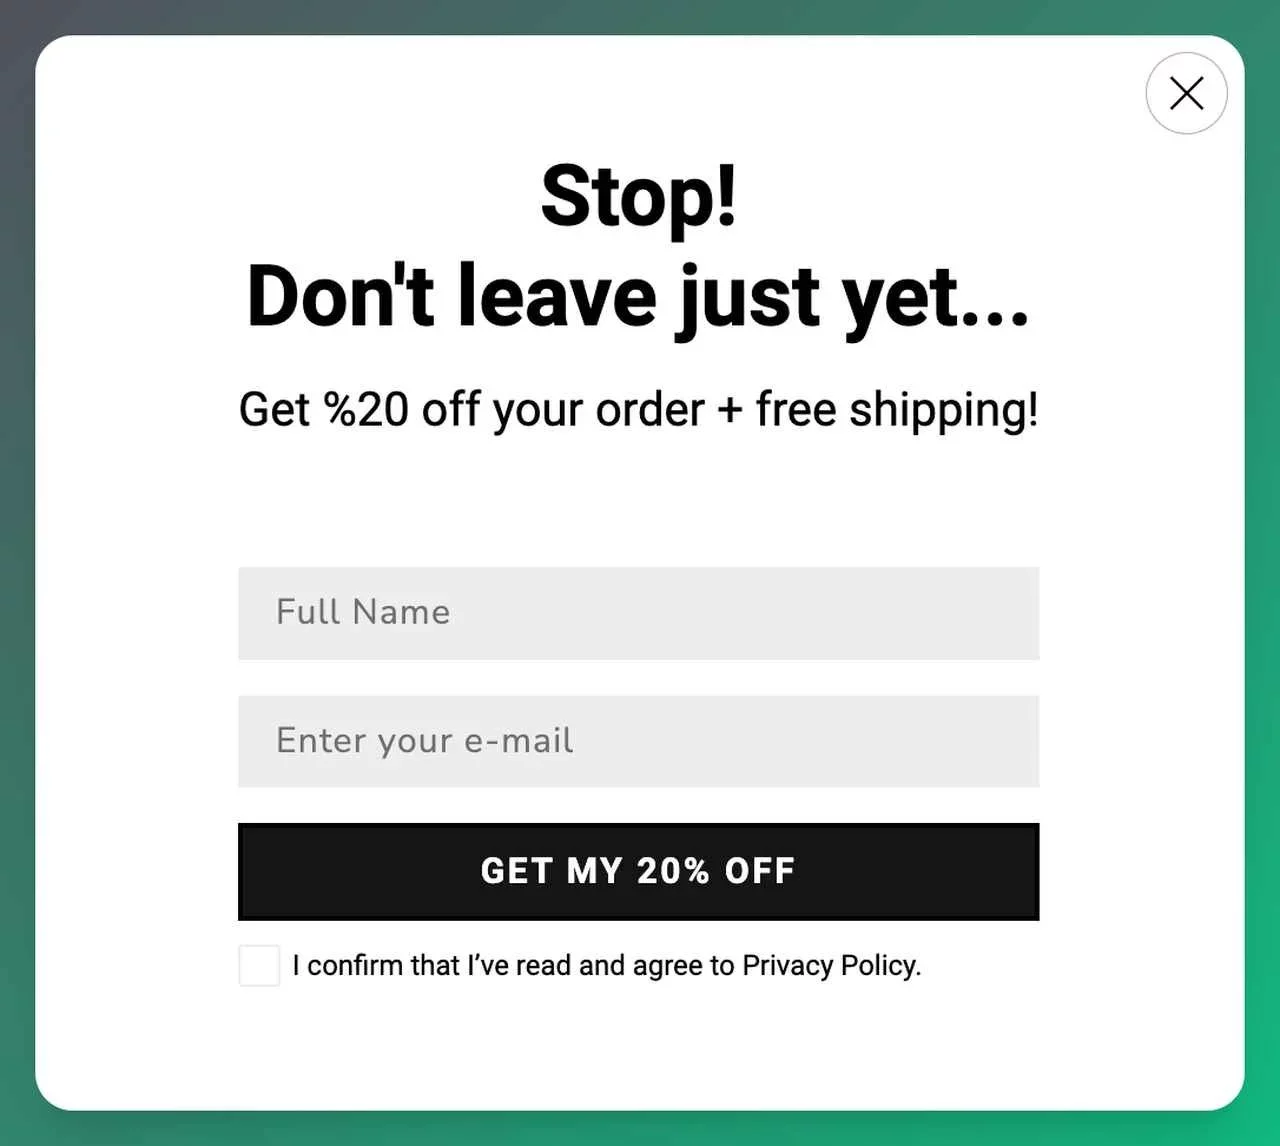 a simple cart abandonment popup example from Popupsmart that offers 20% off and free shipping in return for users' email